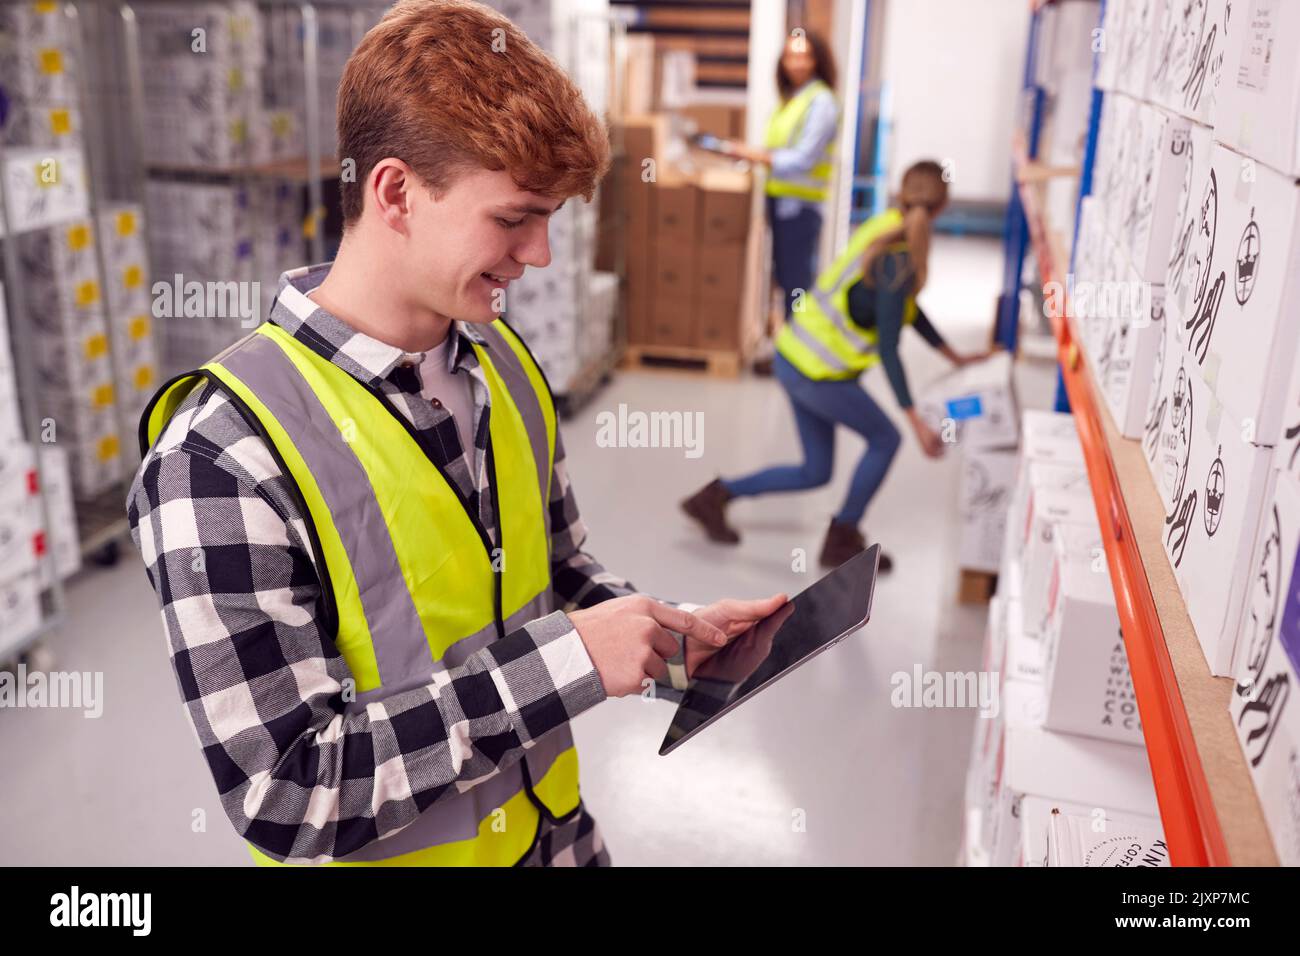 Male Worker Inside Busy Warehouse Checking Stock On Shelves Using Digital Tablet Stock Photo